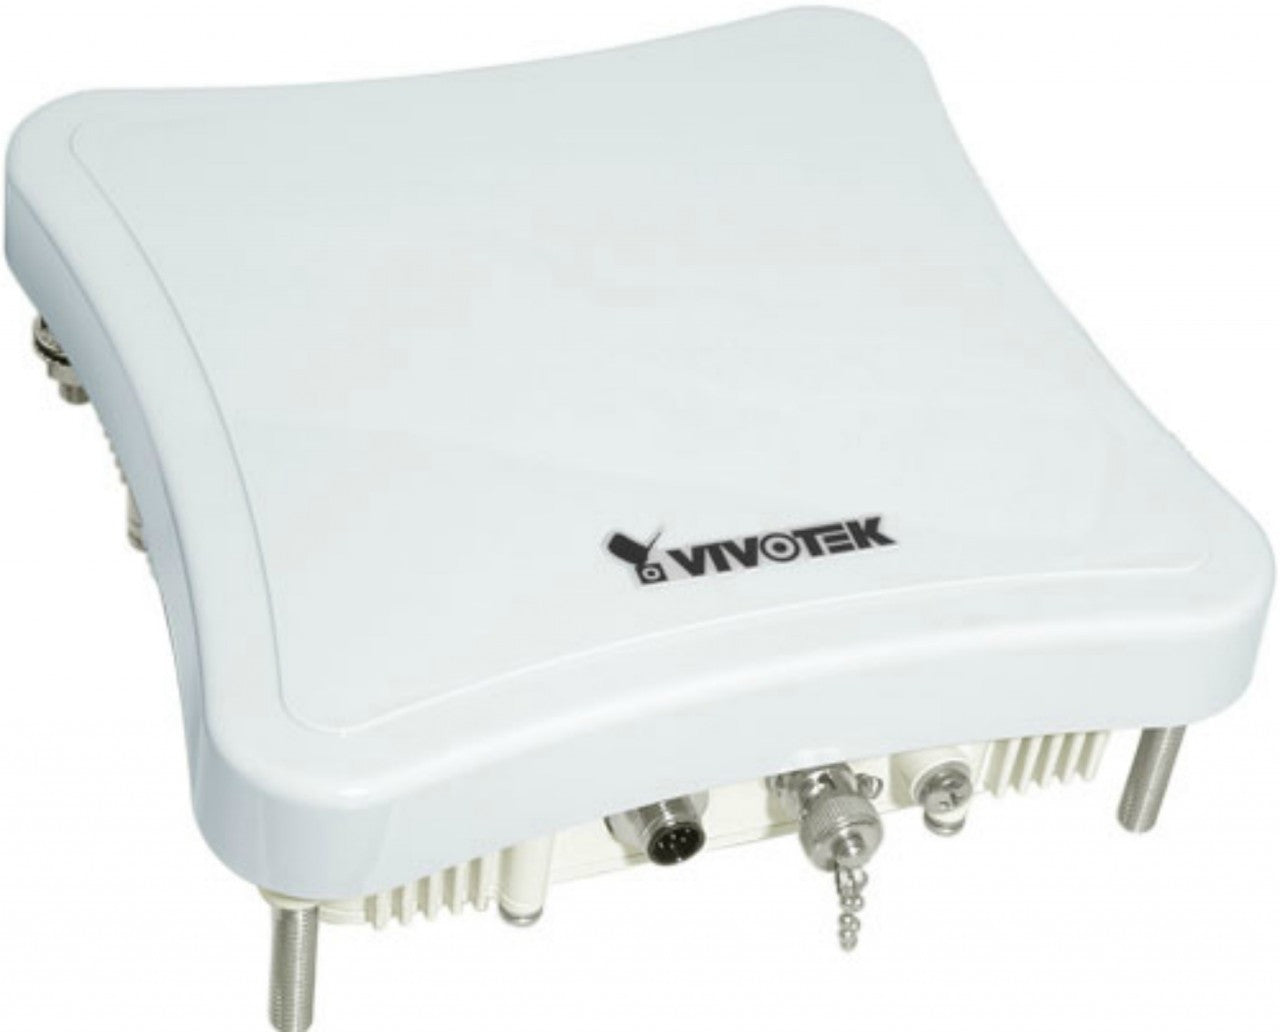 Vivotek AP5822-5-TW-2P1 Outdoor Weather-Proof Dual Band Wireless Access Point